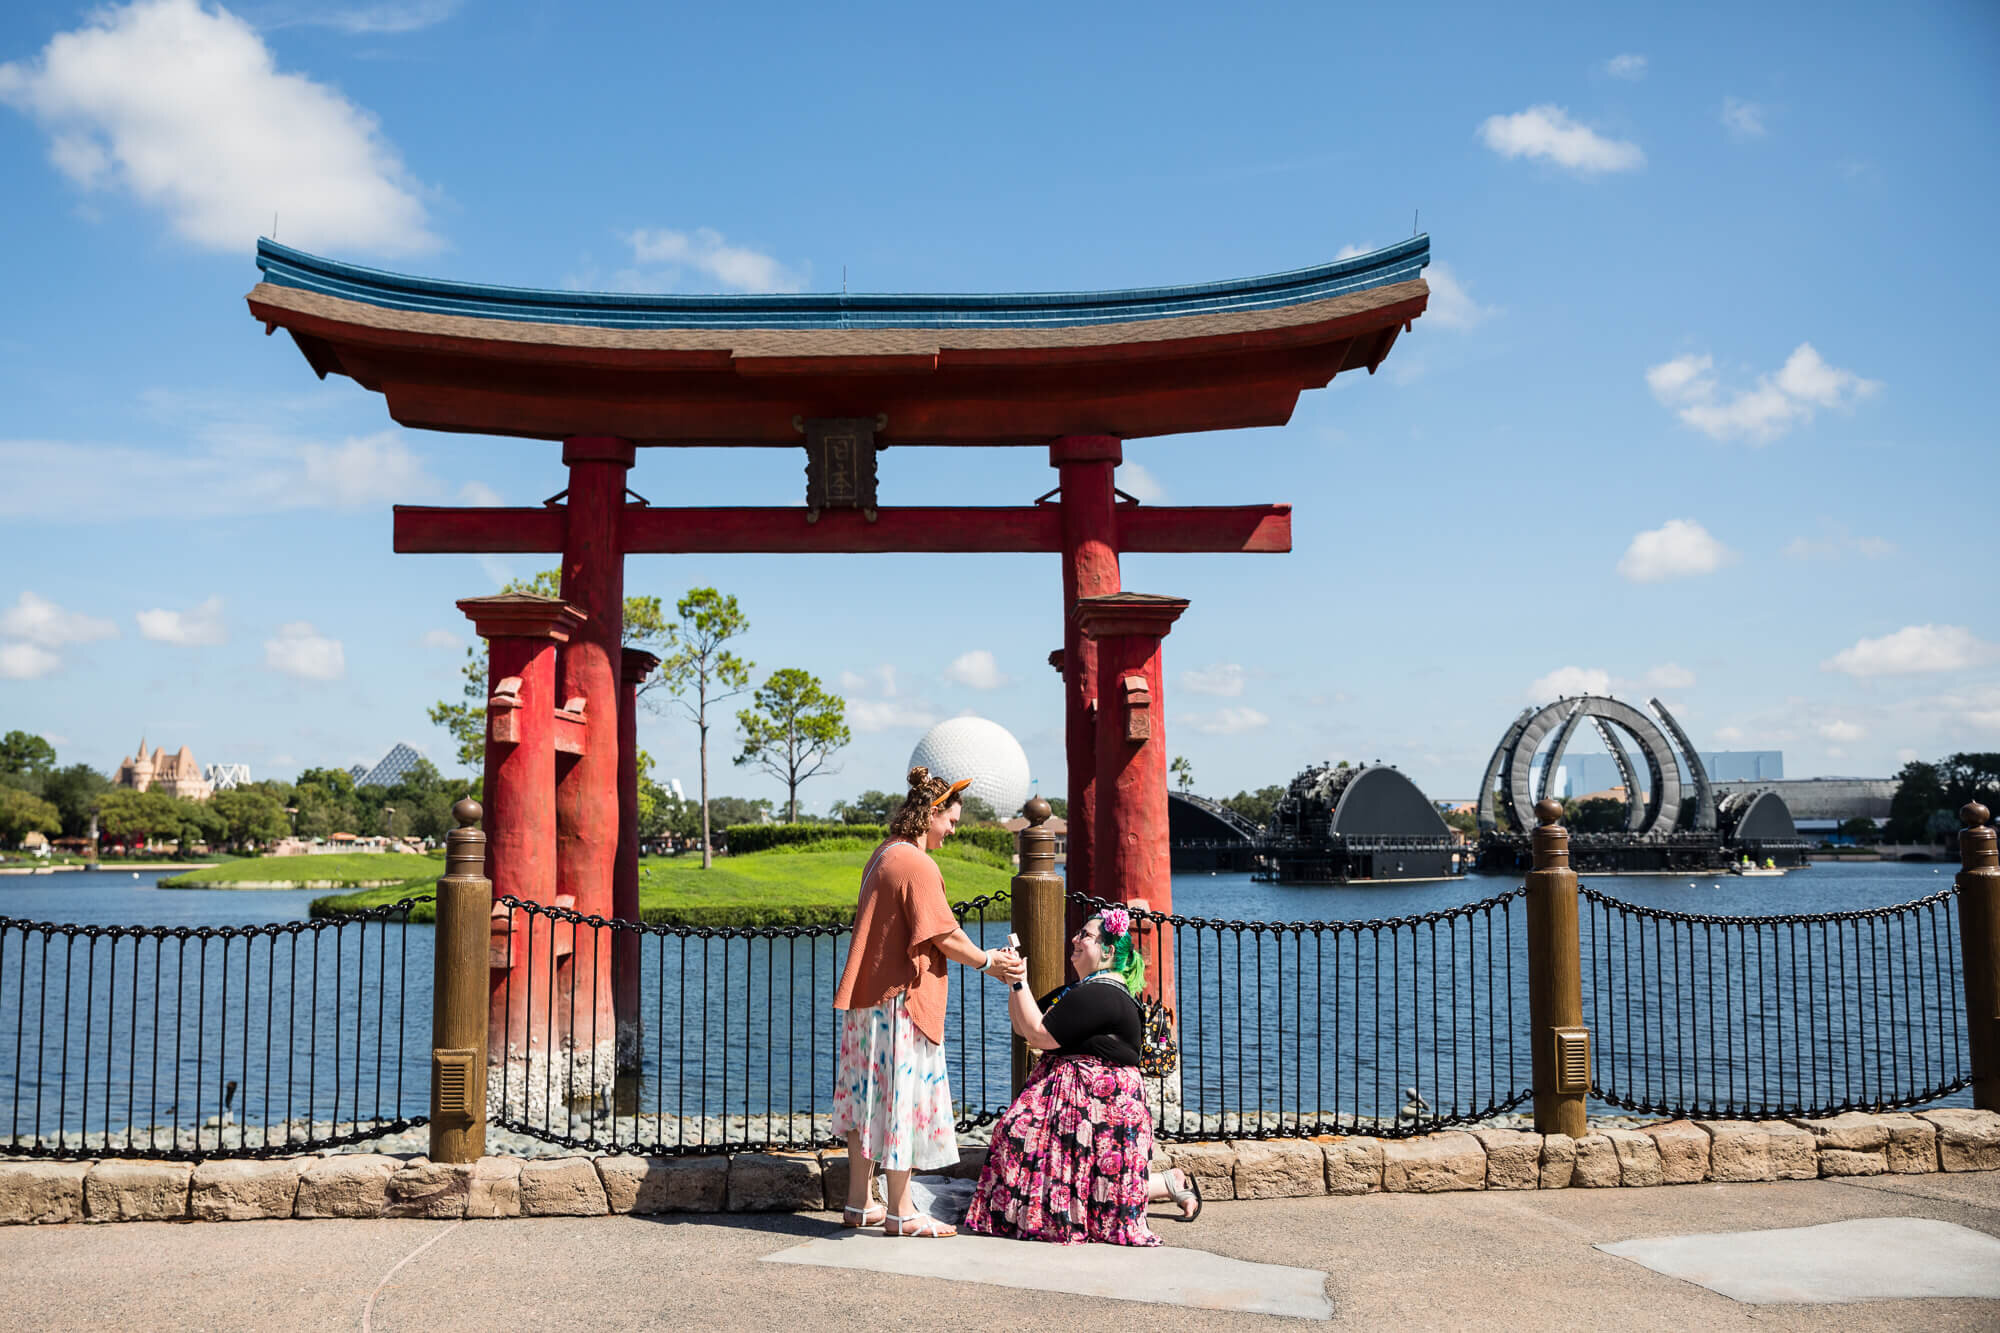  surprise marriage proposal at Epcot 